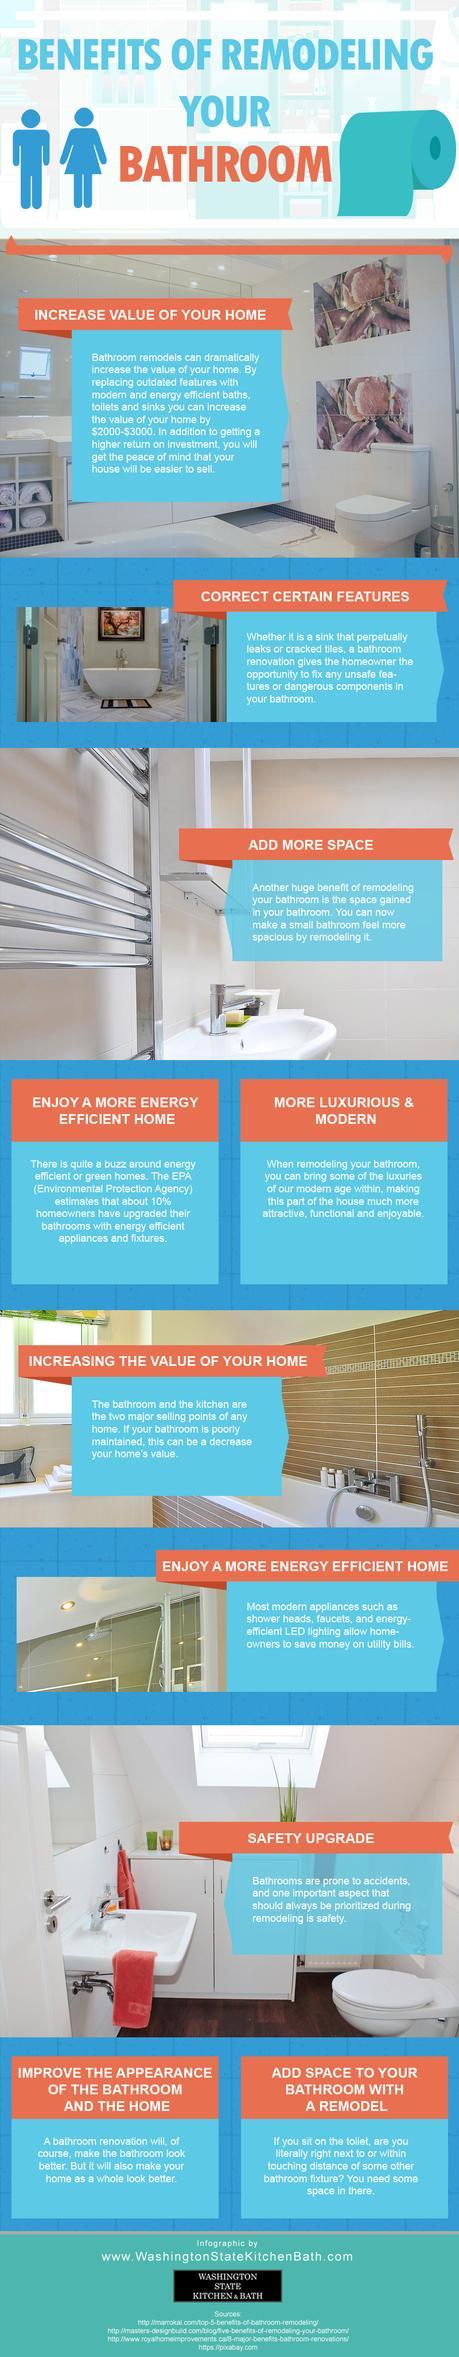 benefits of remodeling your bathroom